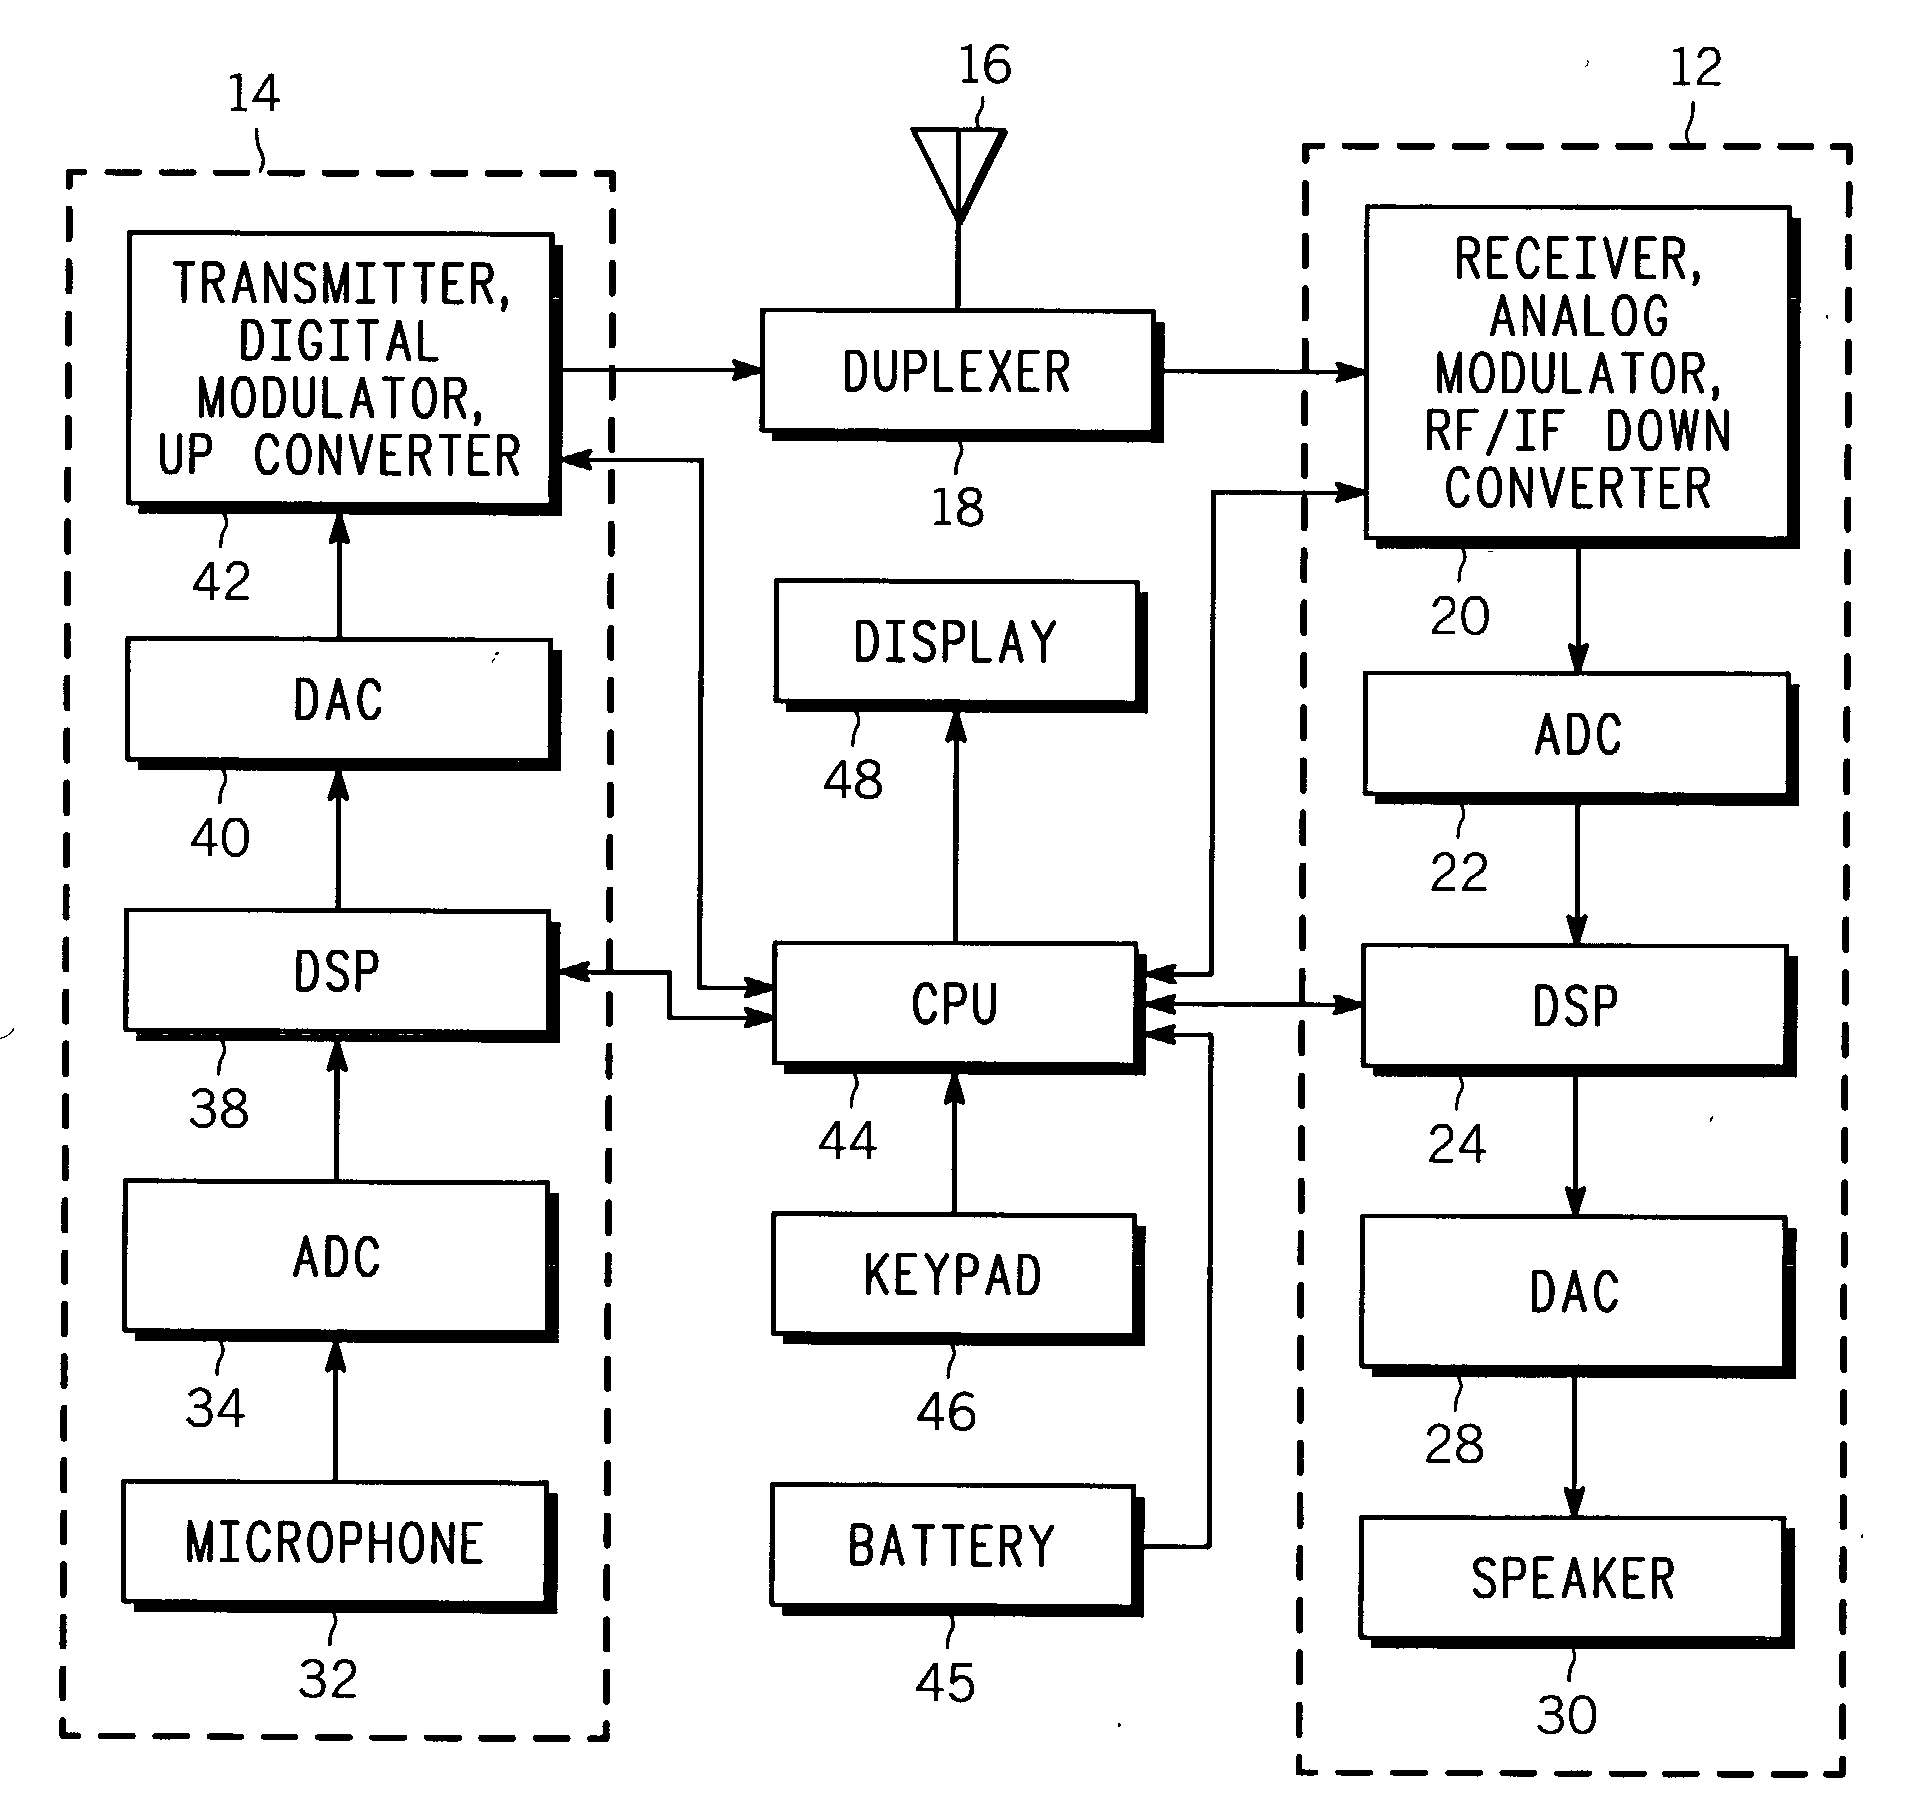 Subscriber device selection of service provider network based on predicted network capabilities